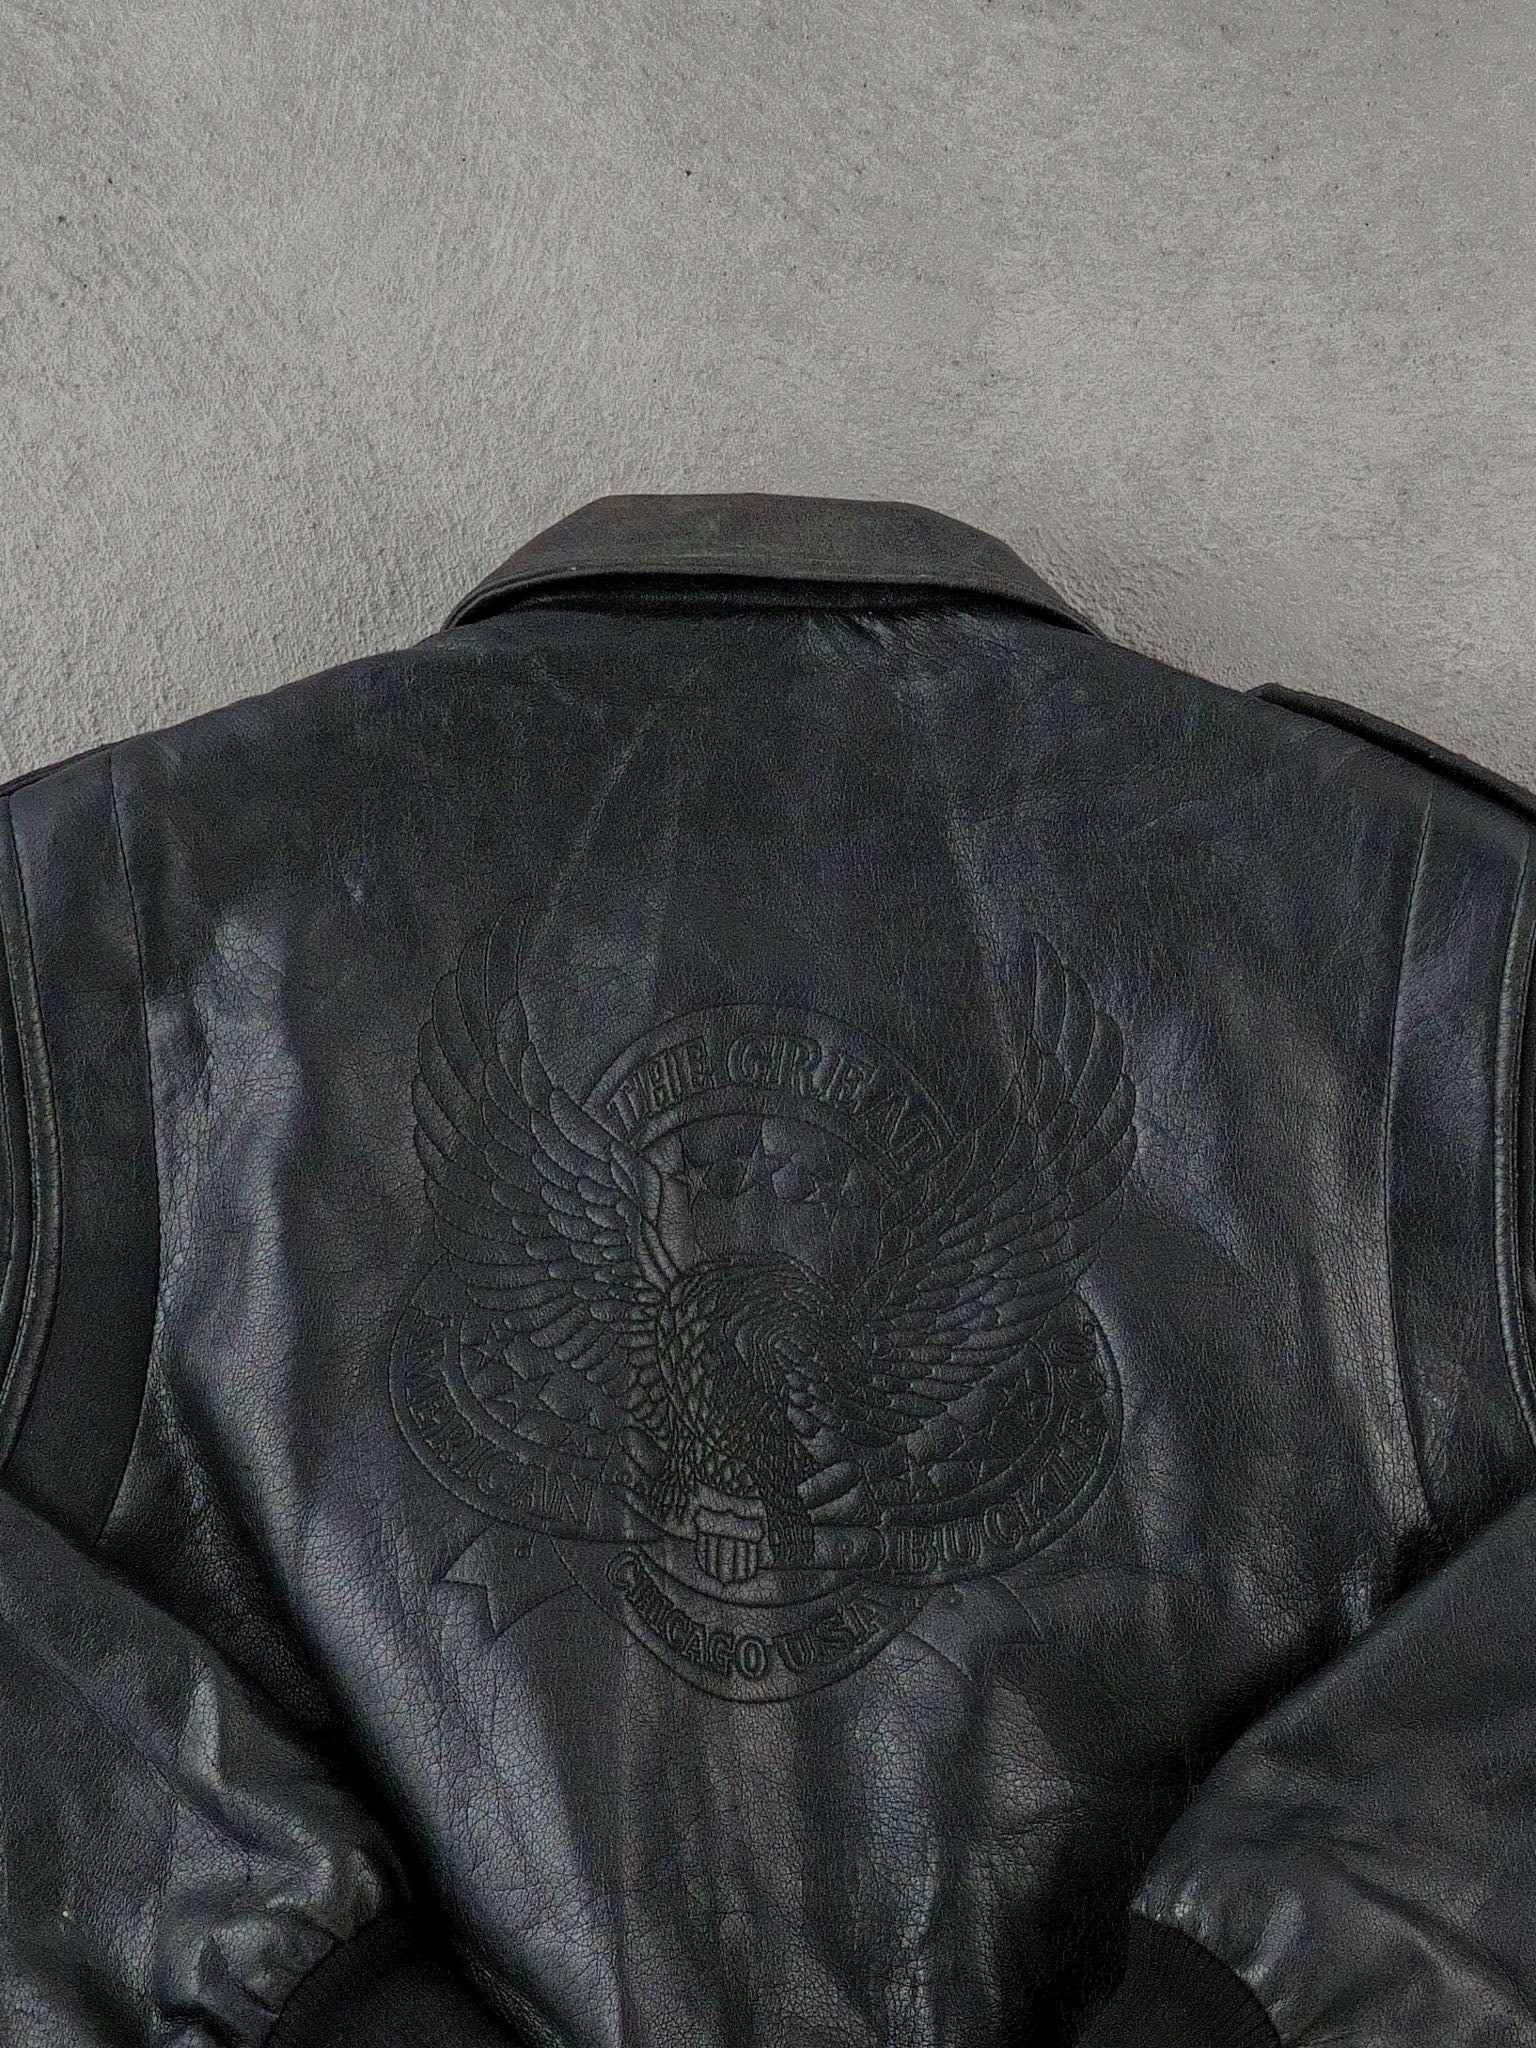 Vintage 90s Black The America Buckle Co Chicago Leather Jacket (L)